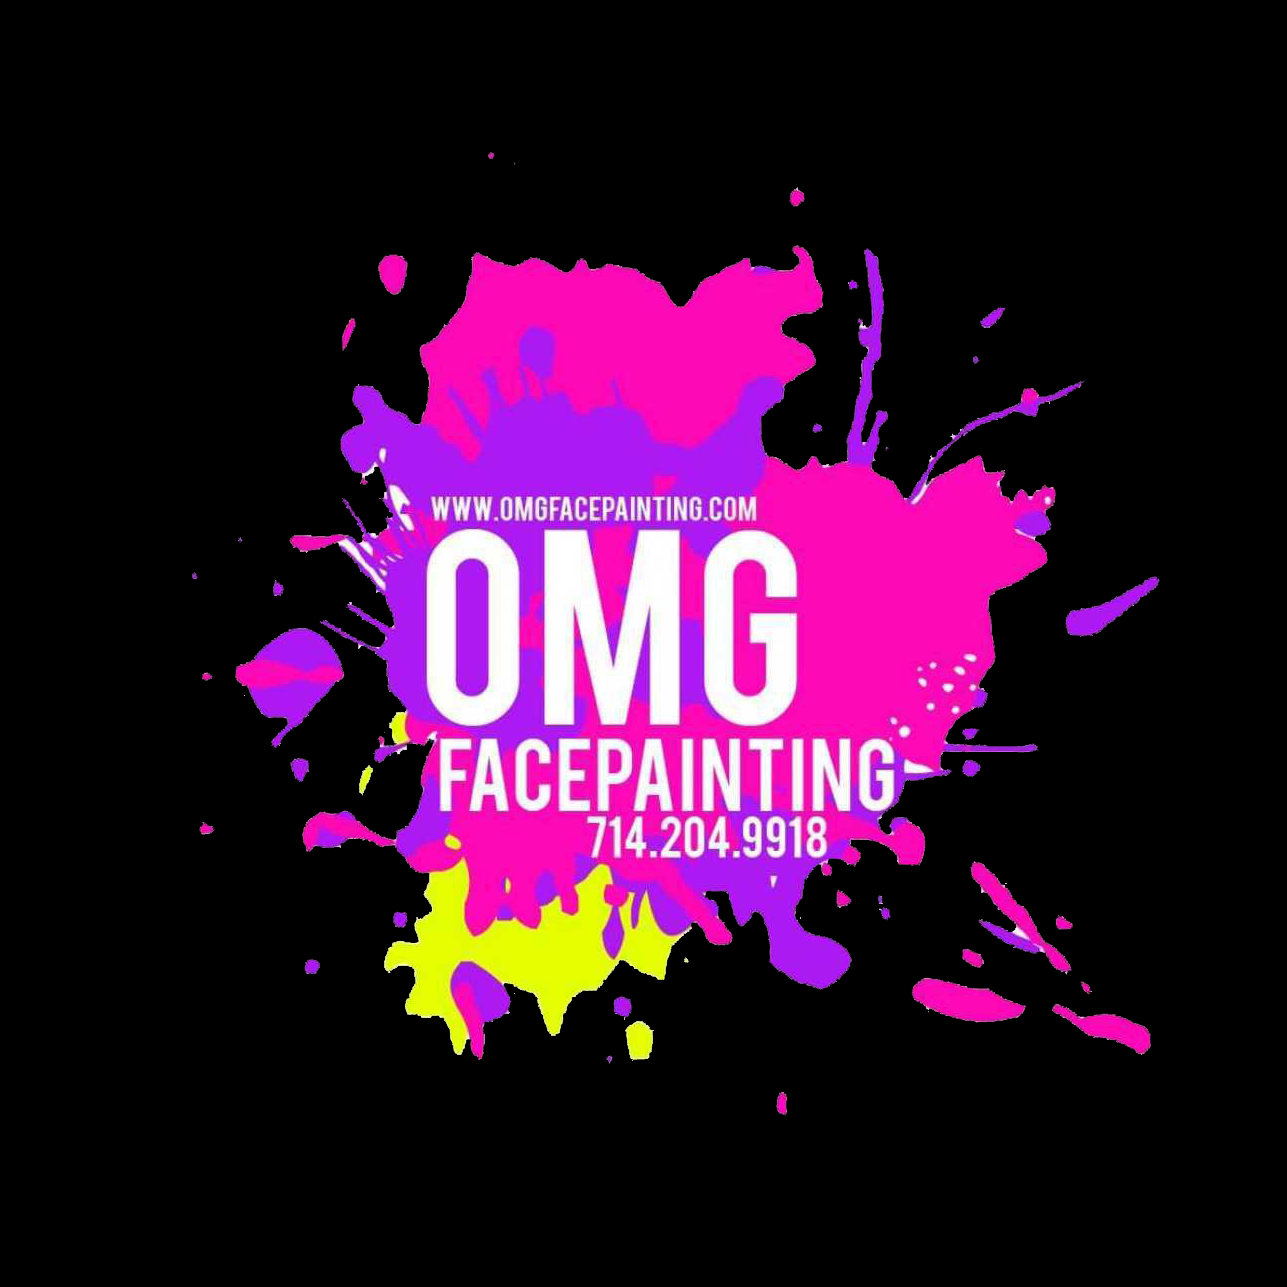 A photo of the OMG Facepainting logo 